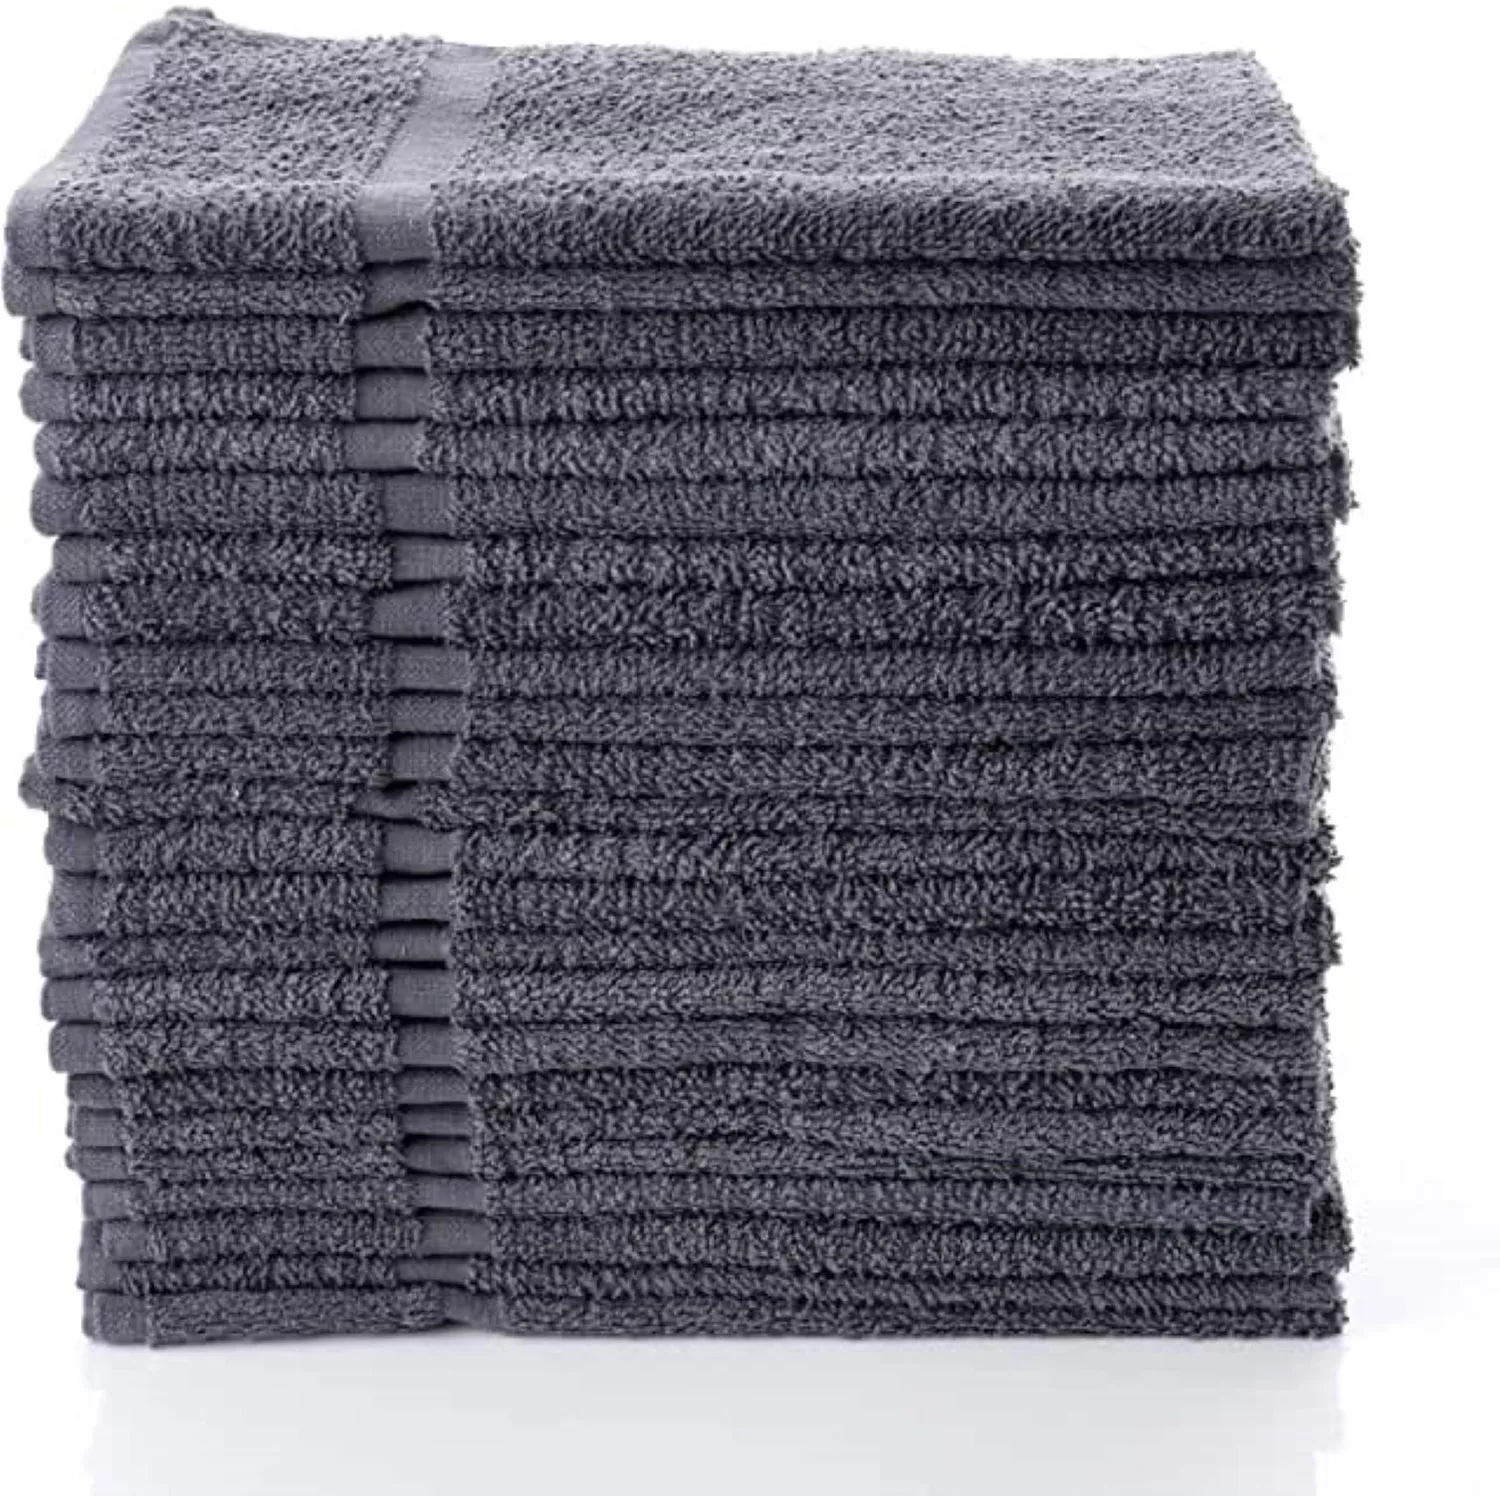 Hometex Terry Cotton Hand Towels